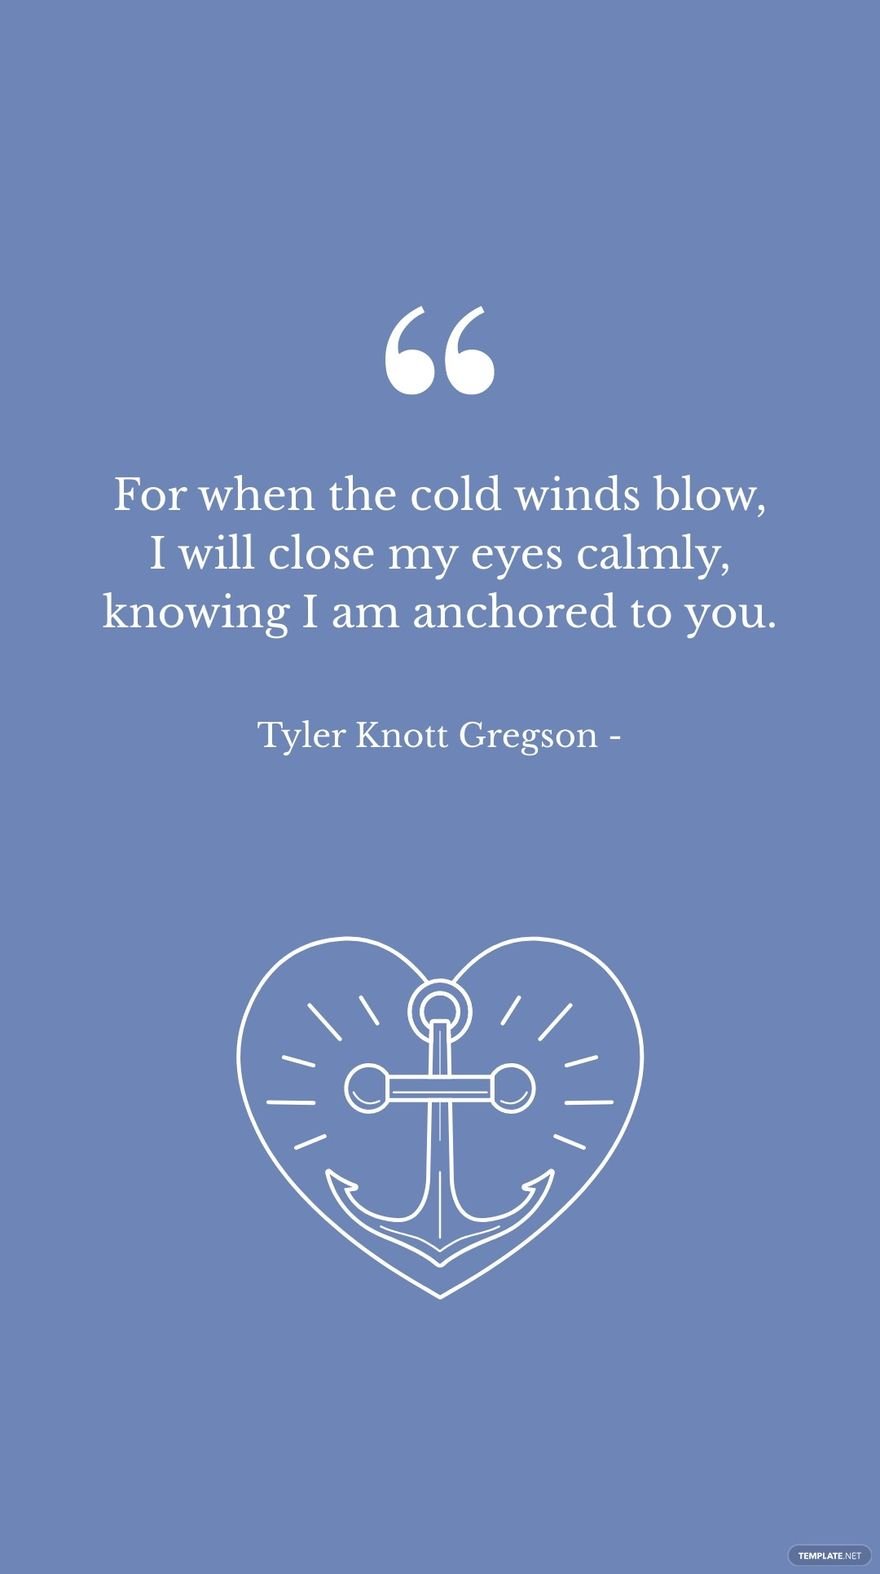 Tyler Knott Gregson - For when the cold winds blow, I will close my eyes calmly, knowing I am anchored to you. in JPG